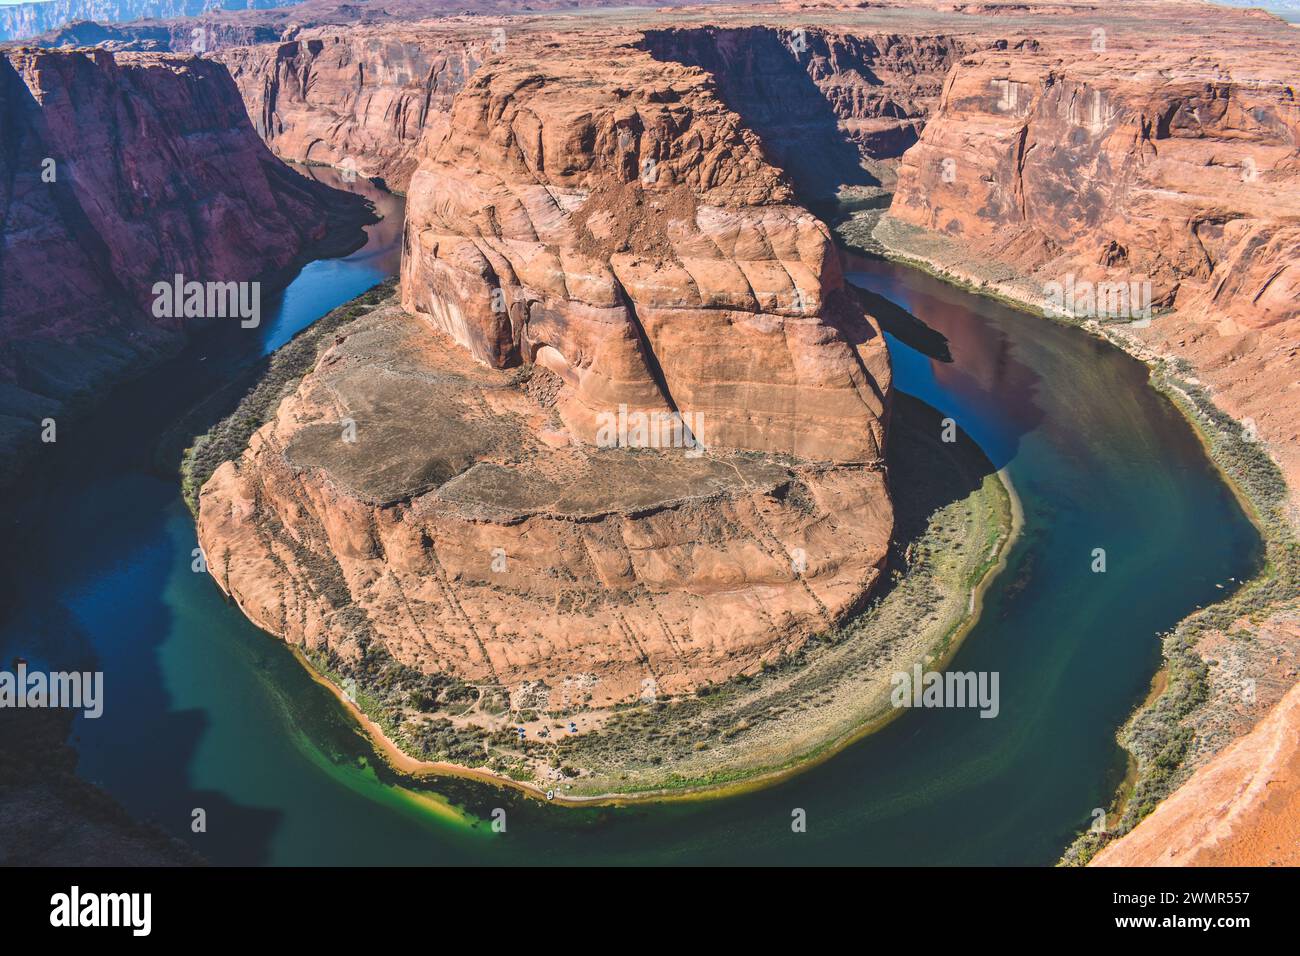 Horseshoe bend in Page Arizona on a bright sunny day Stock Photo